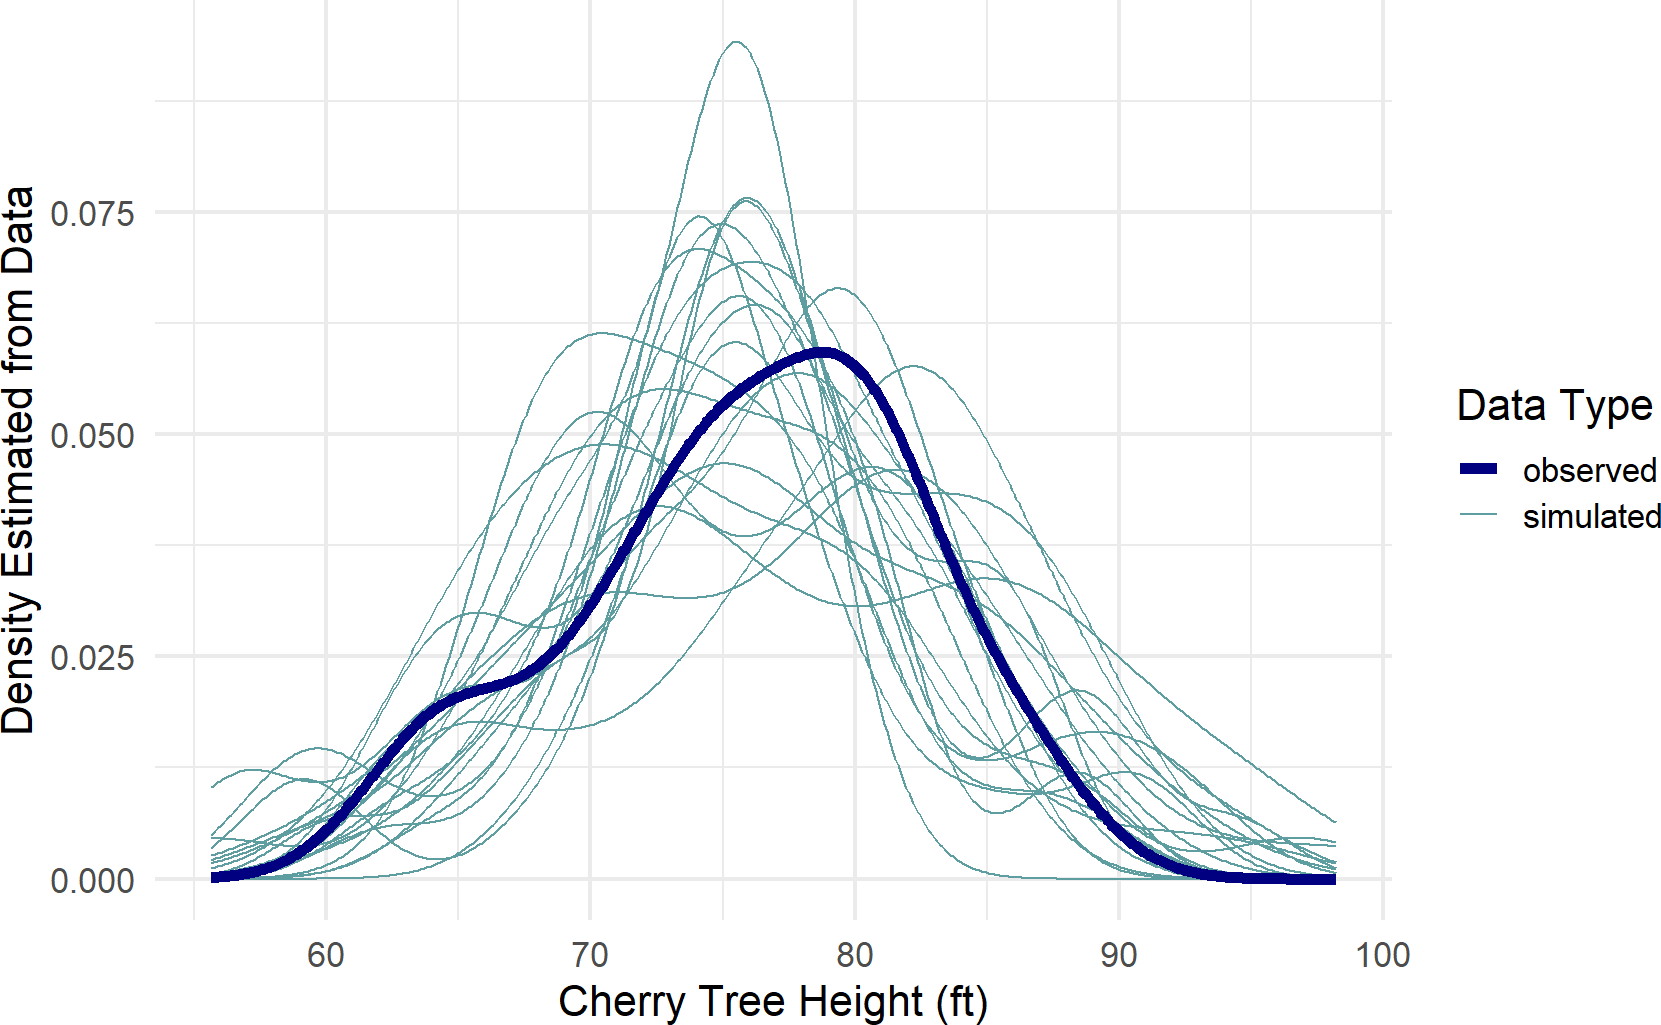 A posterior predictive check for our model of observed cherry tree heights.